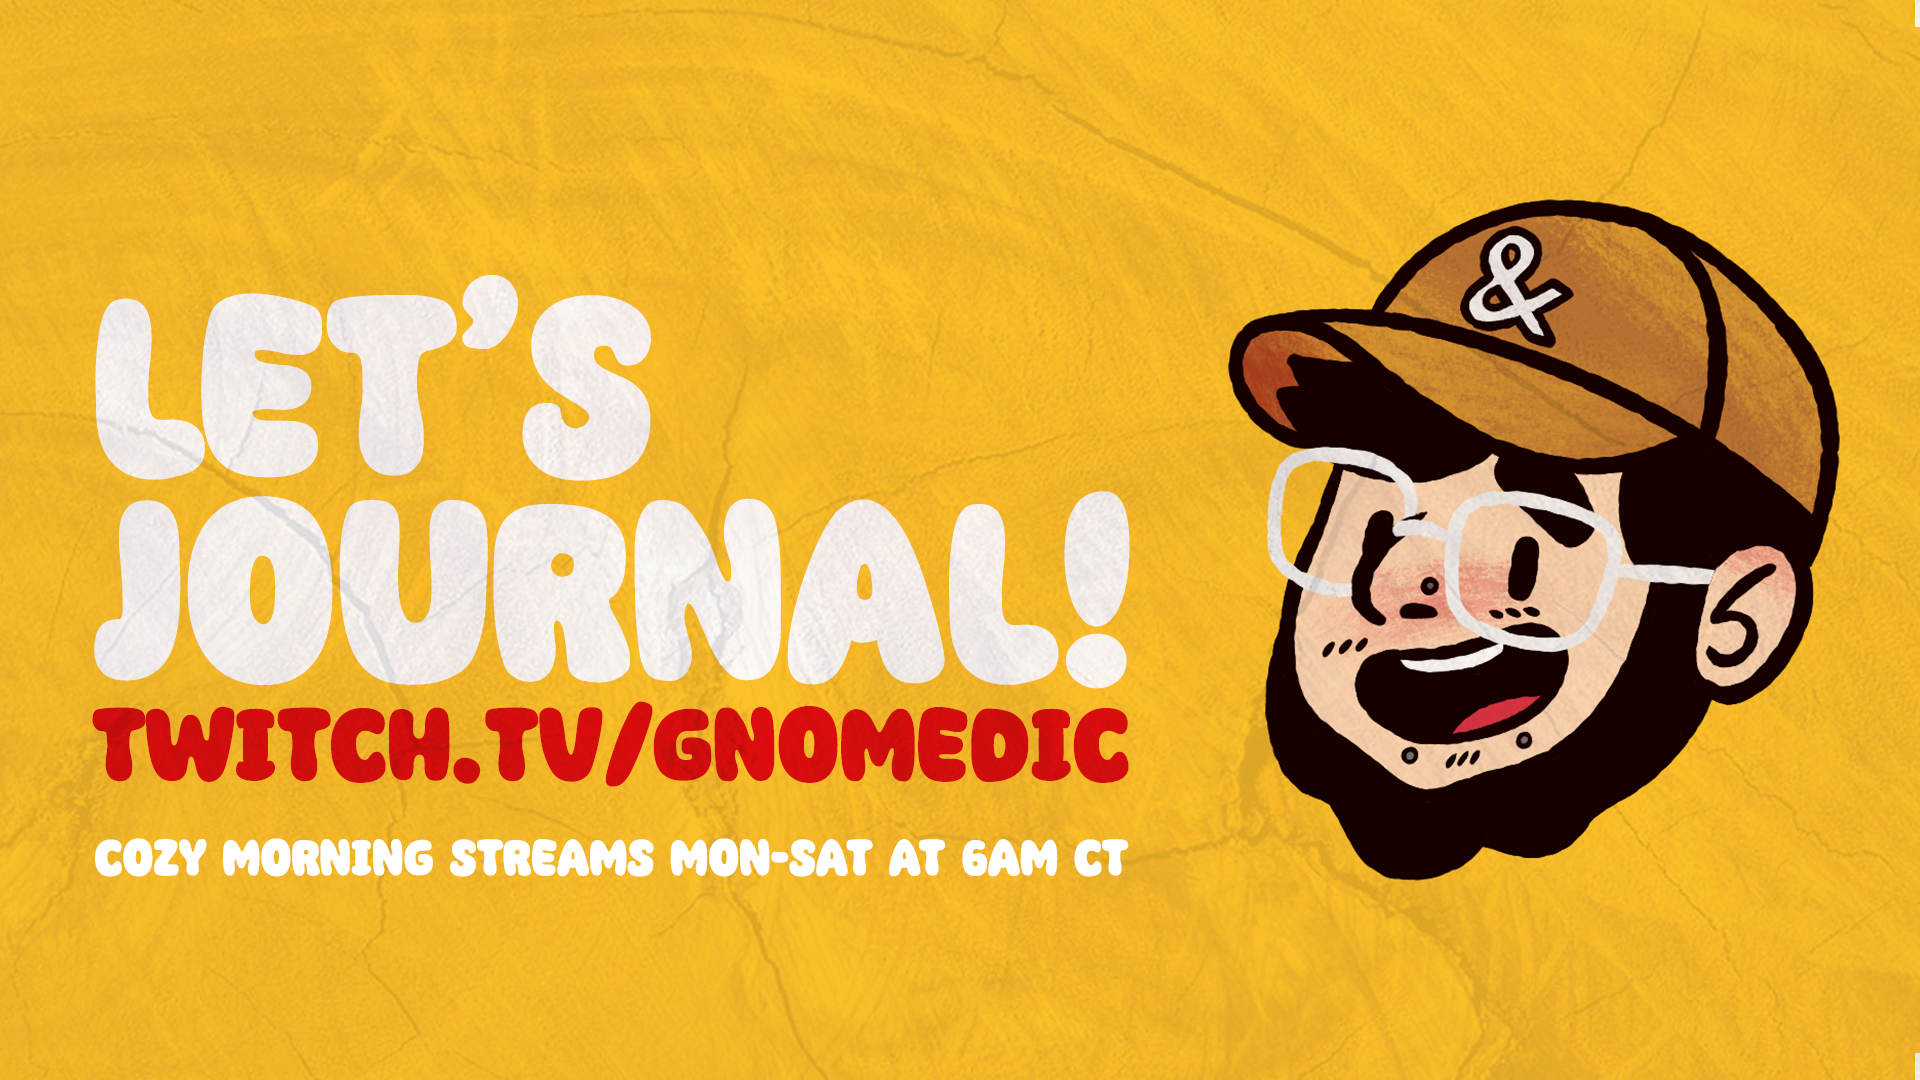 let's journal. twitch.tv/gnomedic. cozy morning streams mon-sat at 6am CT